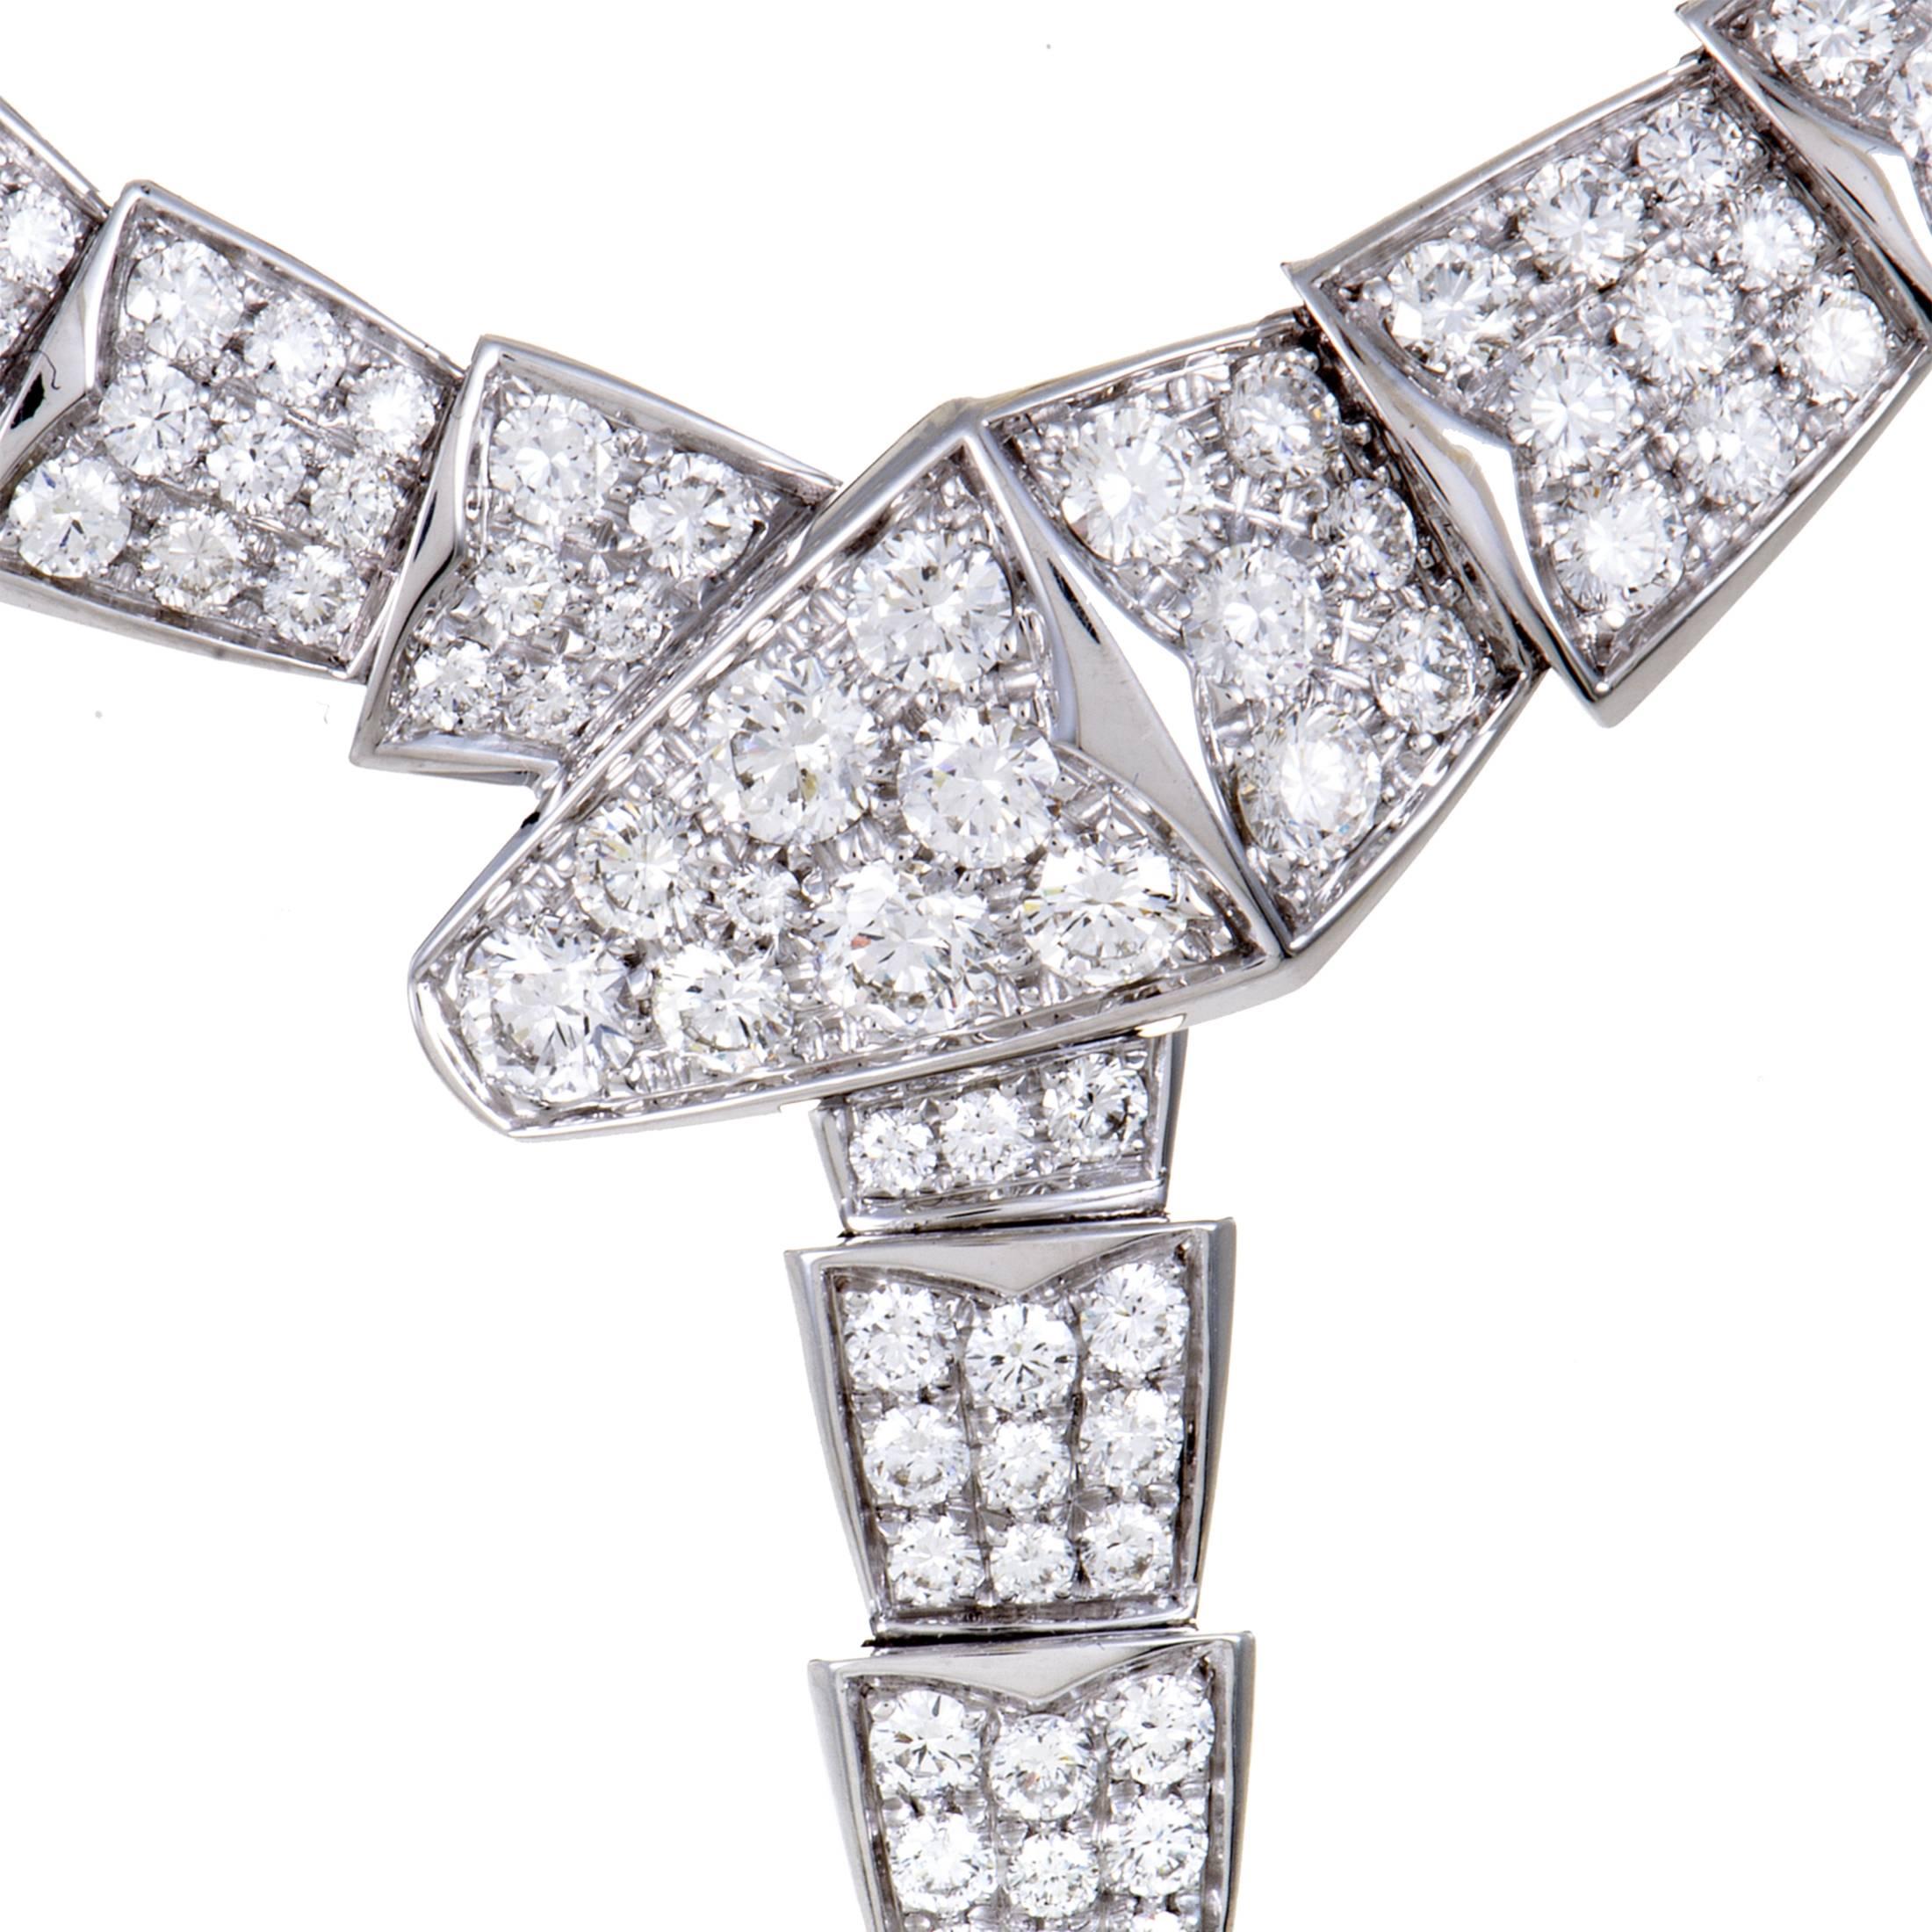 A brilliant full diamond pave is the hallmark of this extremely decadent and necklace from Bvlgari. Made from shining 18K white gold and set with a full pave of 15.15ct of glistening white diamonds, this necklace is sure to stun all who behold it's